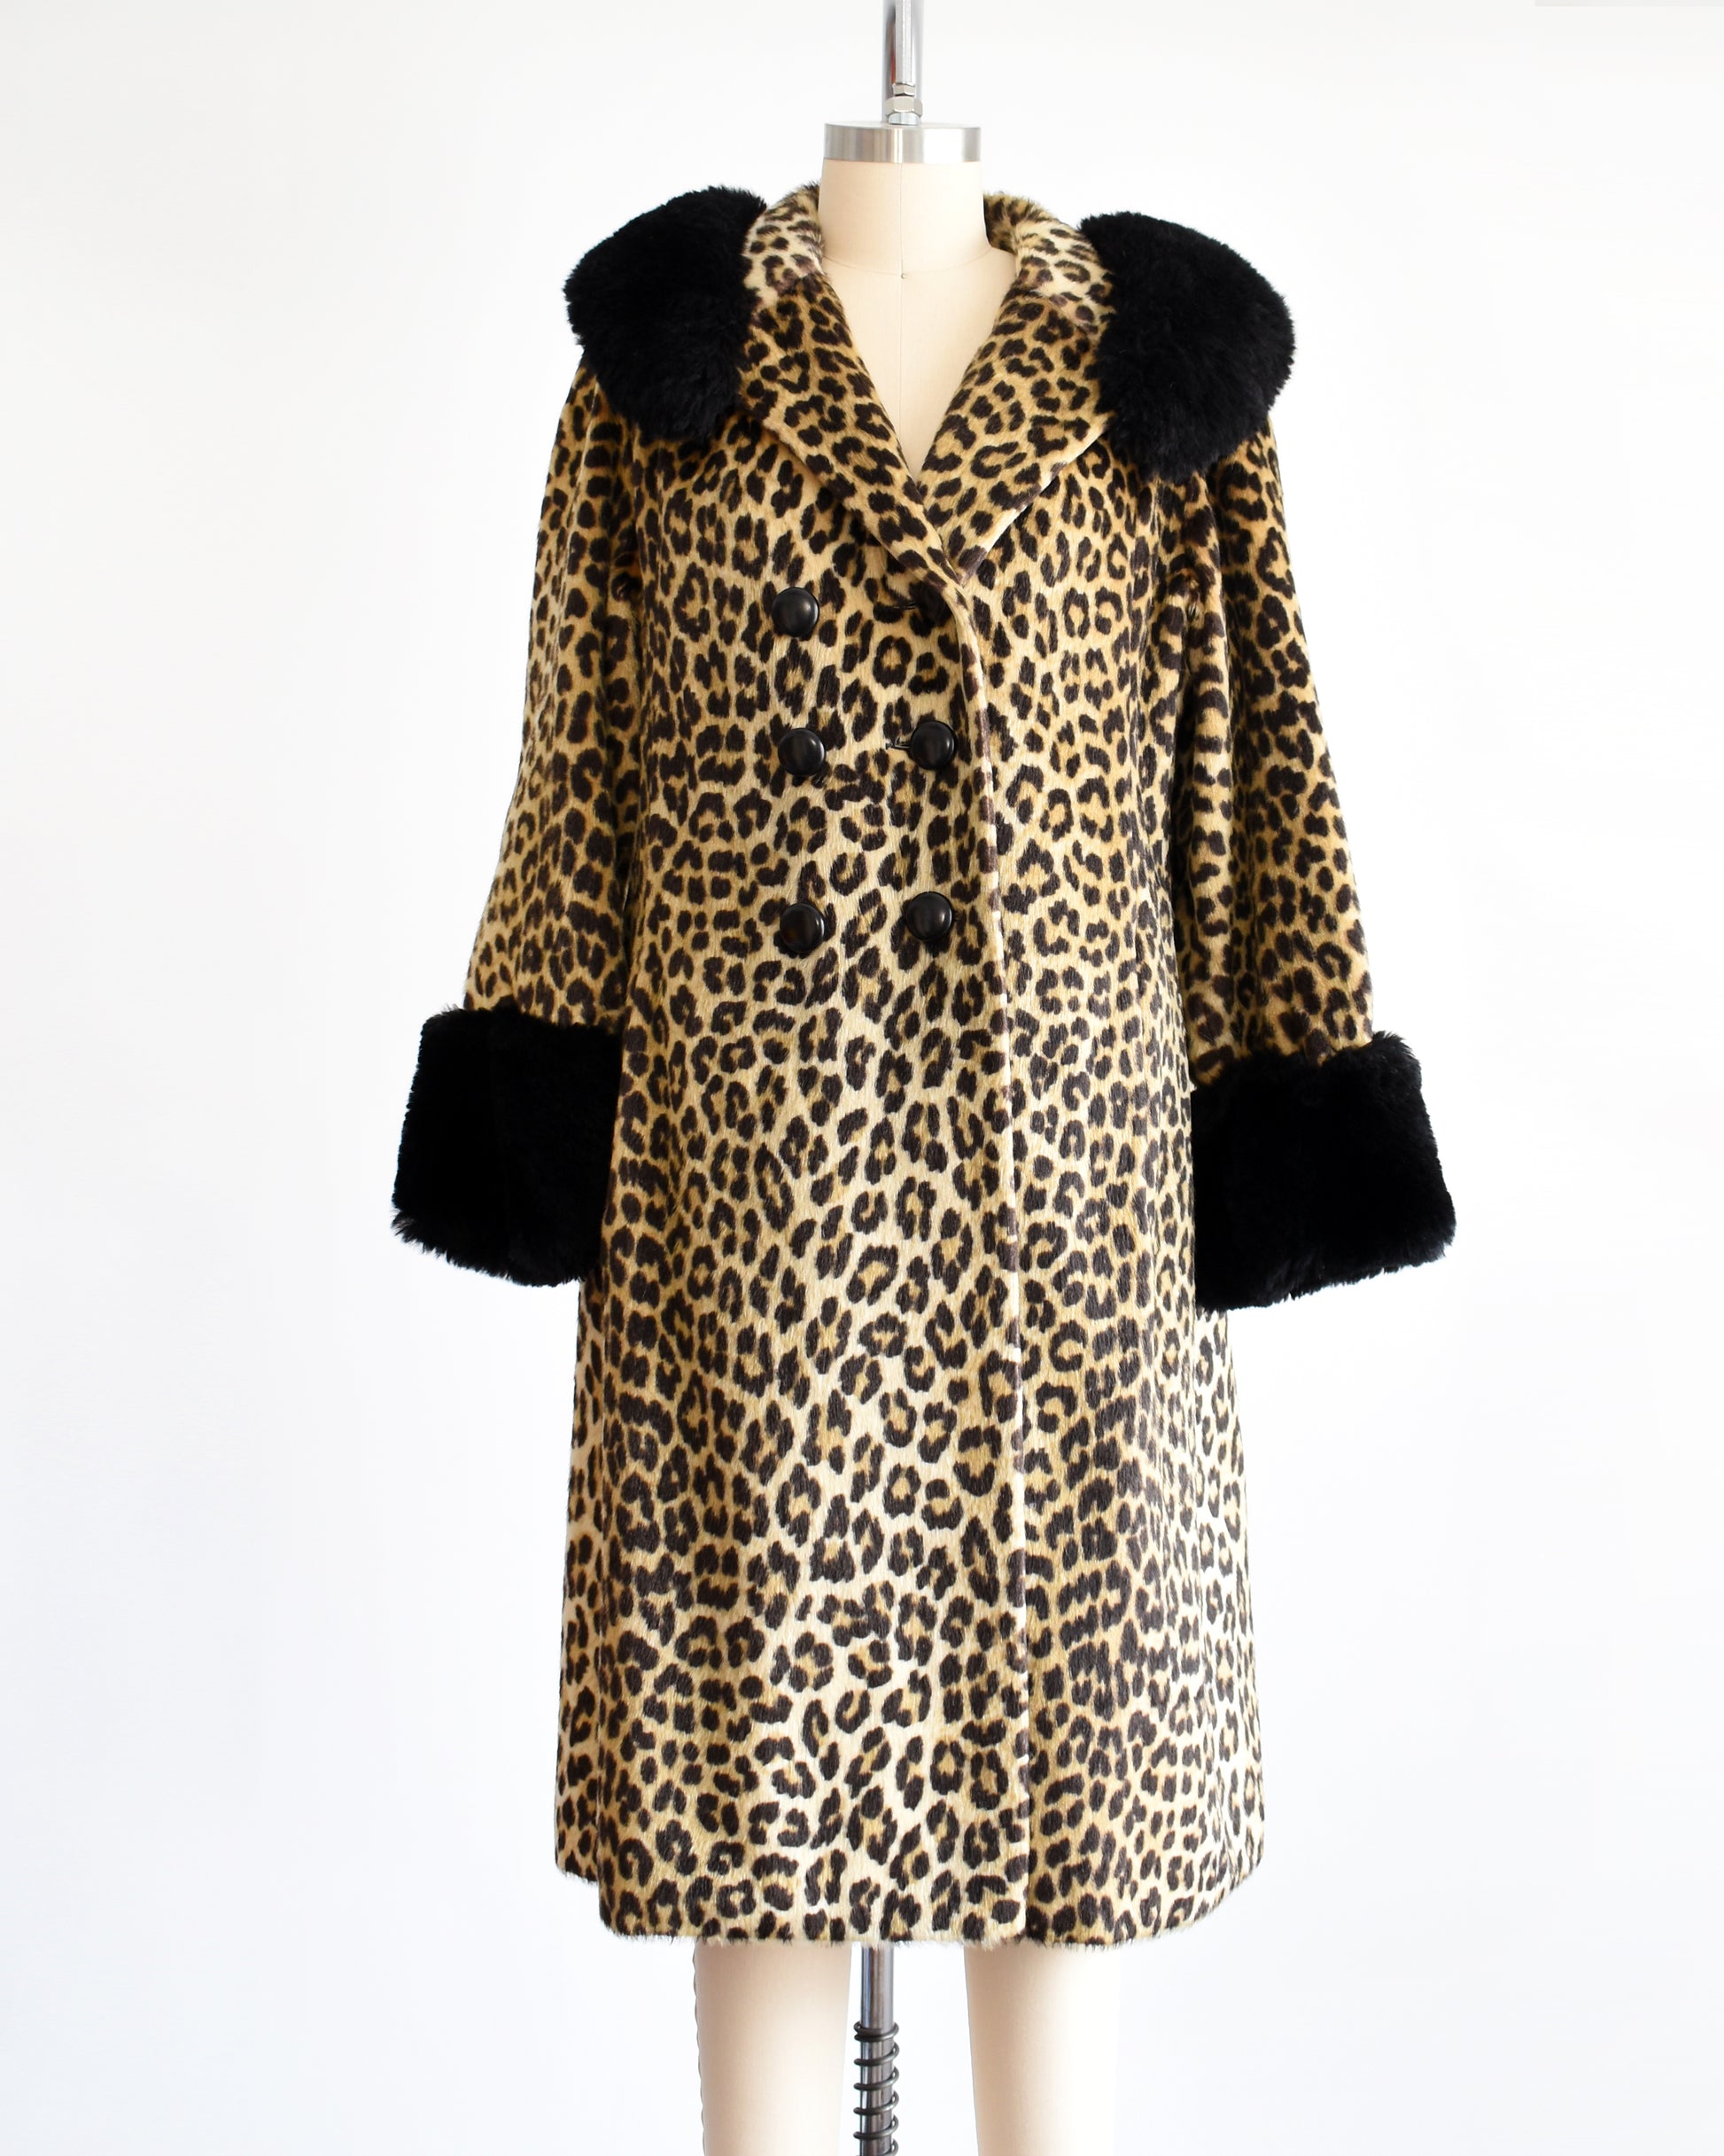 A vintage 1960s faux fur leopard print coat. Black plush trim along the collar and on the cuffs. The top button is unbuttoned.